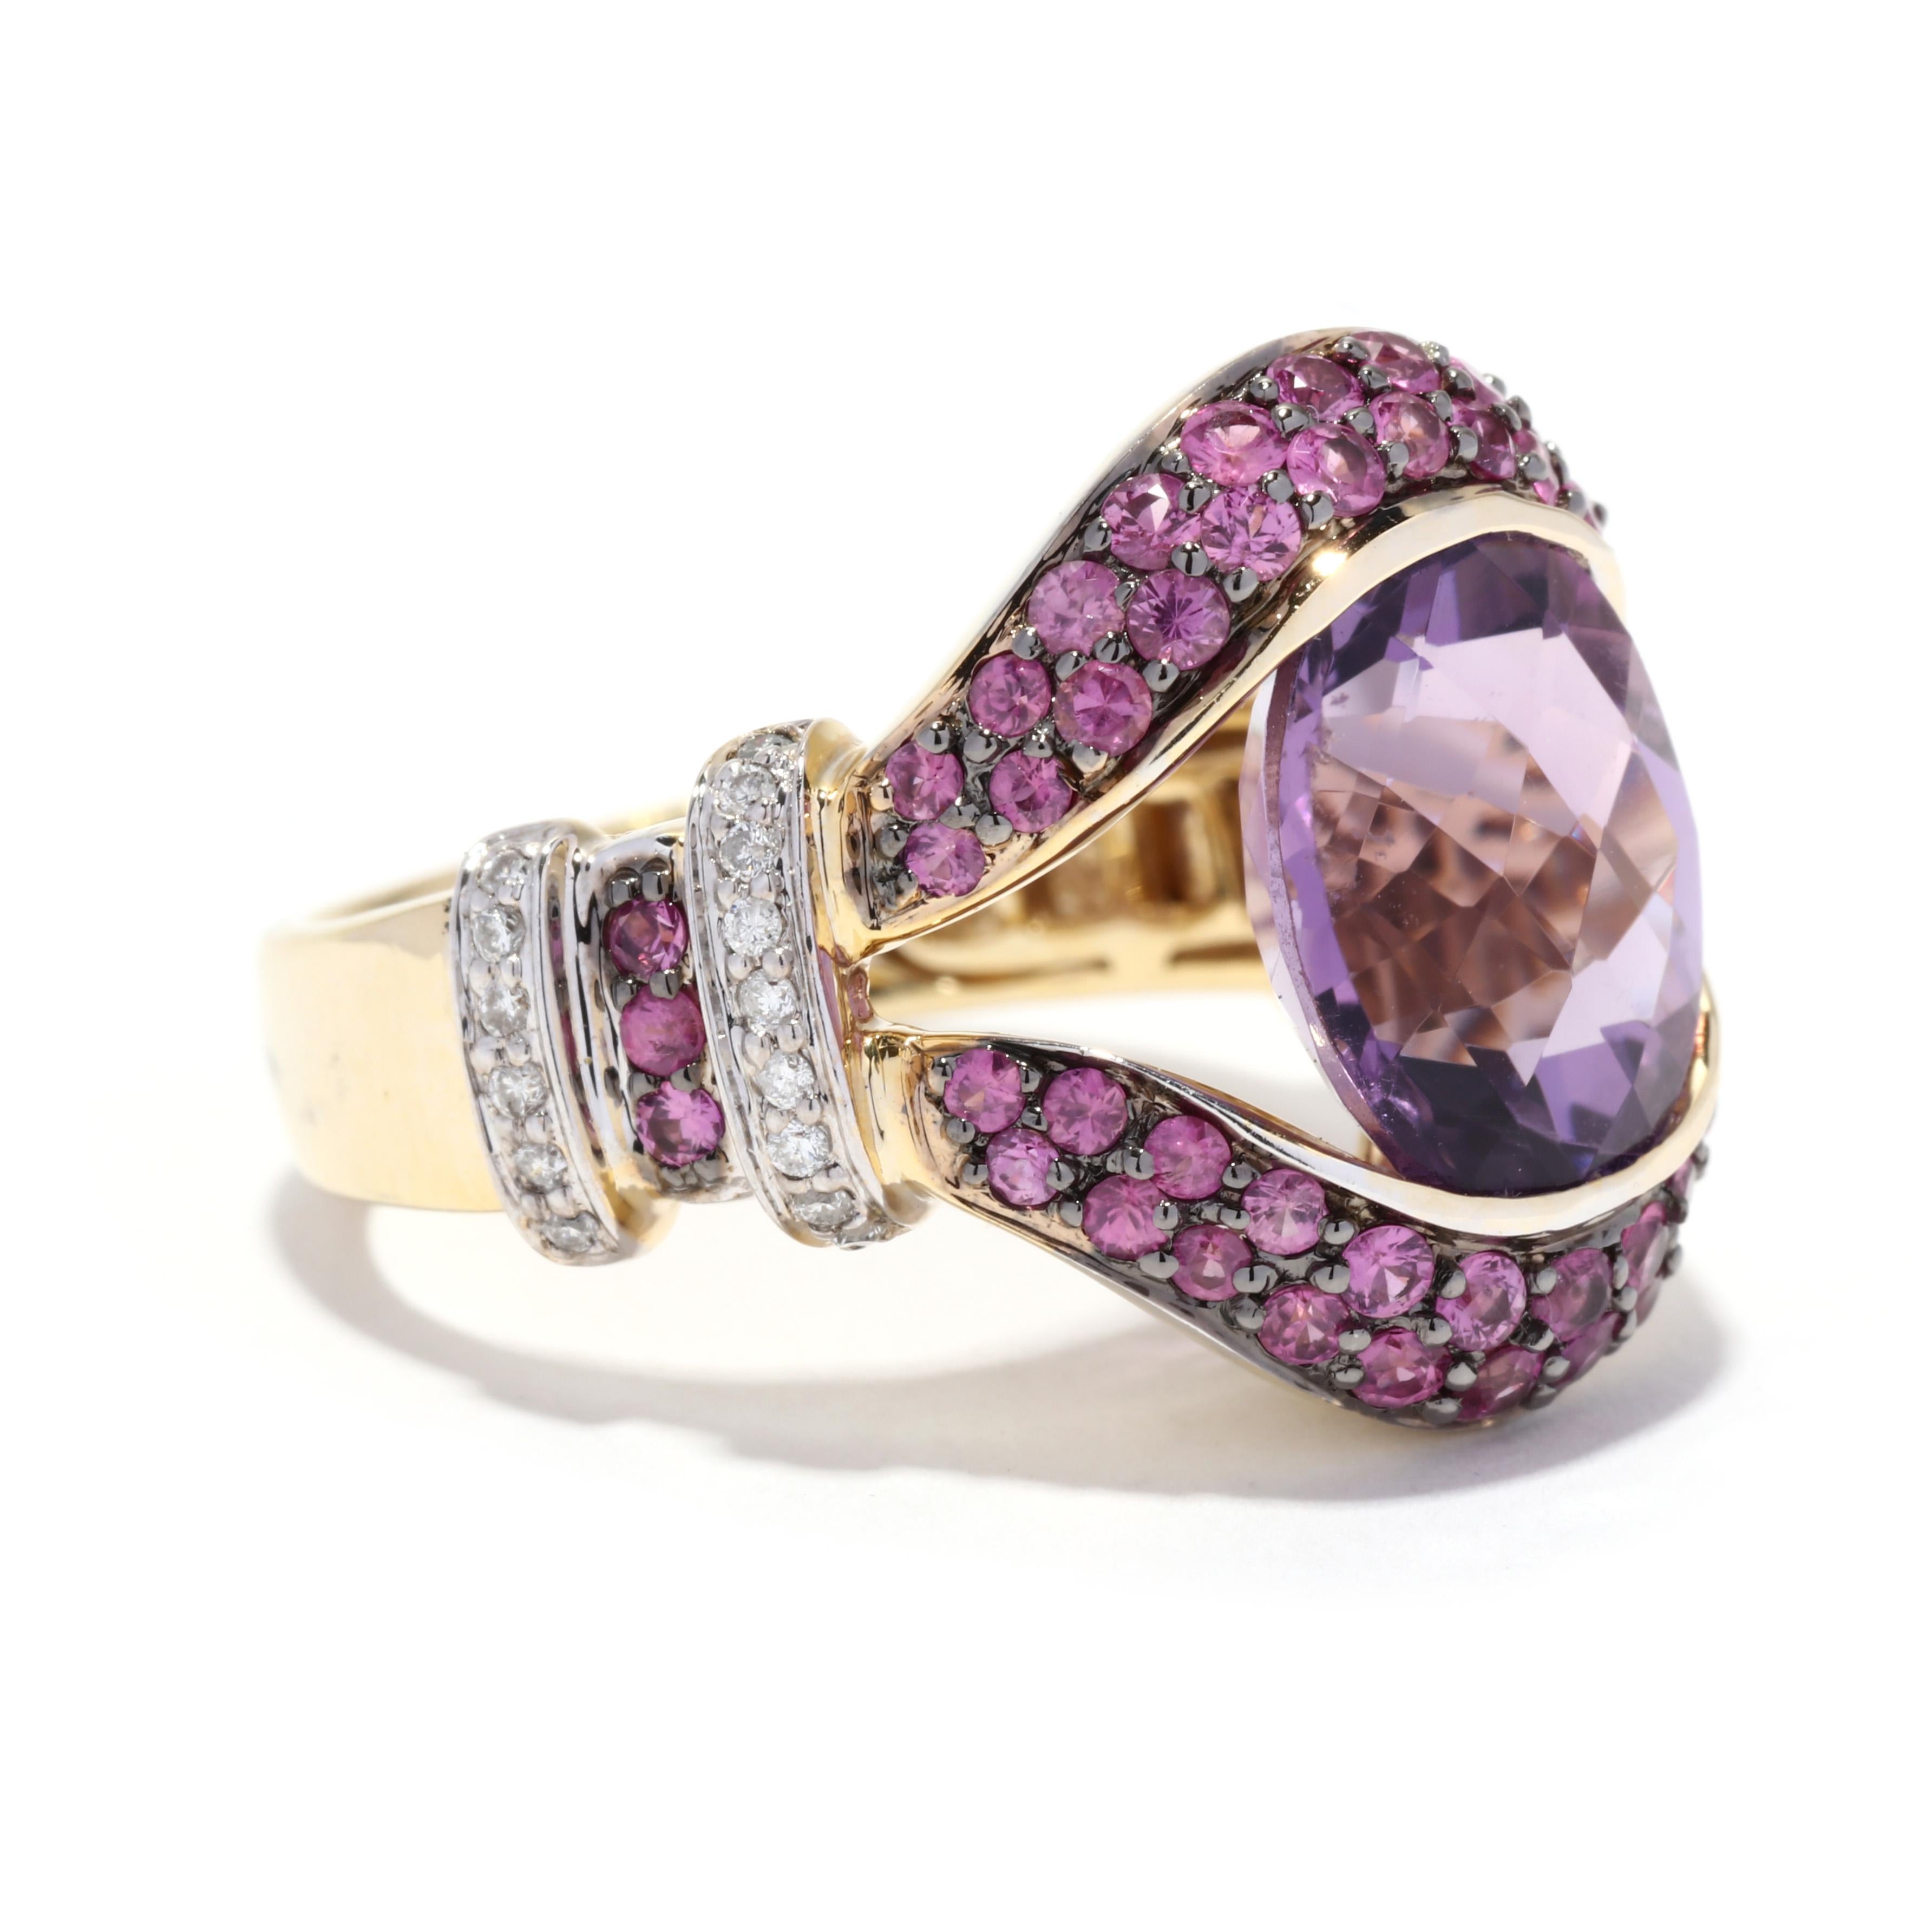 A 14 karat yellow gold amethyst, pink sapphire and diamond cocktail ring. This February birthstone ring features an oval checkerboard amethyst center stone weighing approximately 4.62 carat surrounded by a split band halo with pavé set round cut